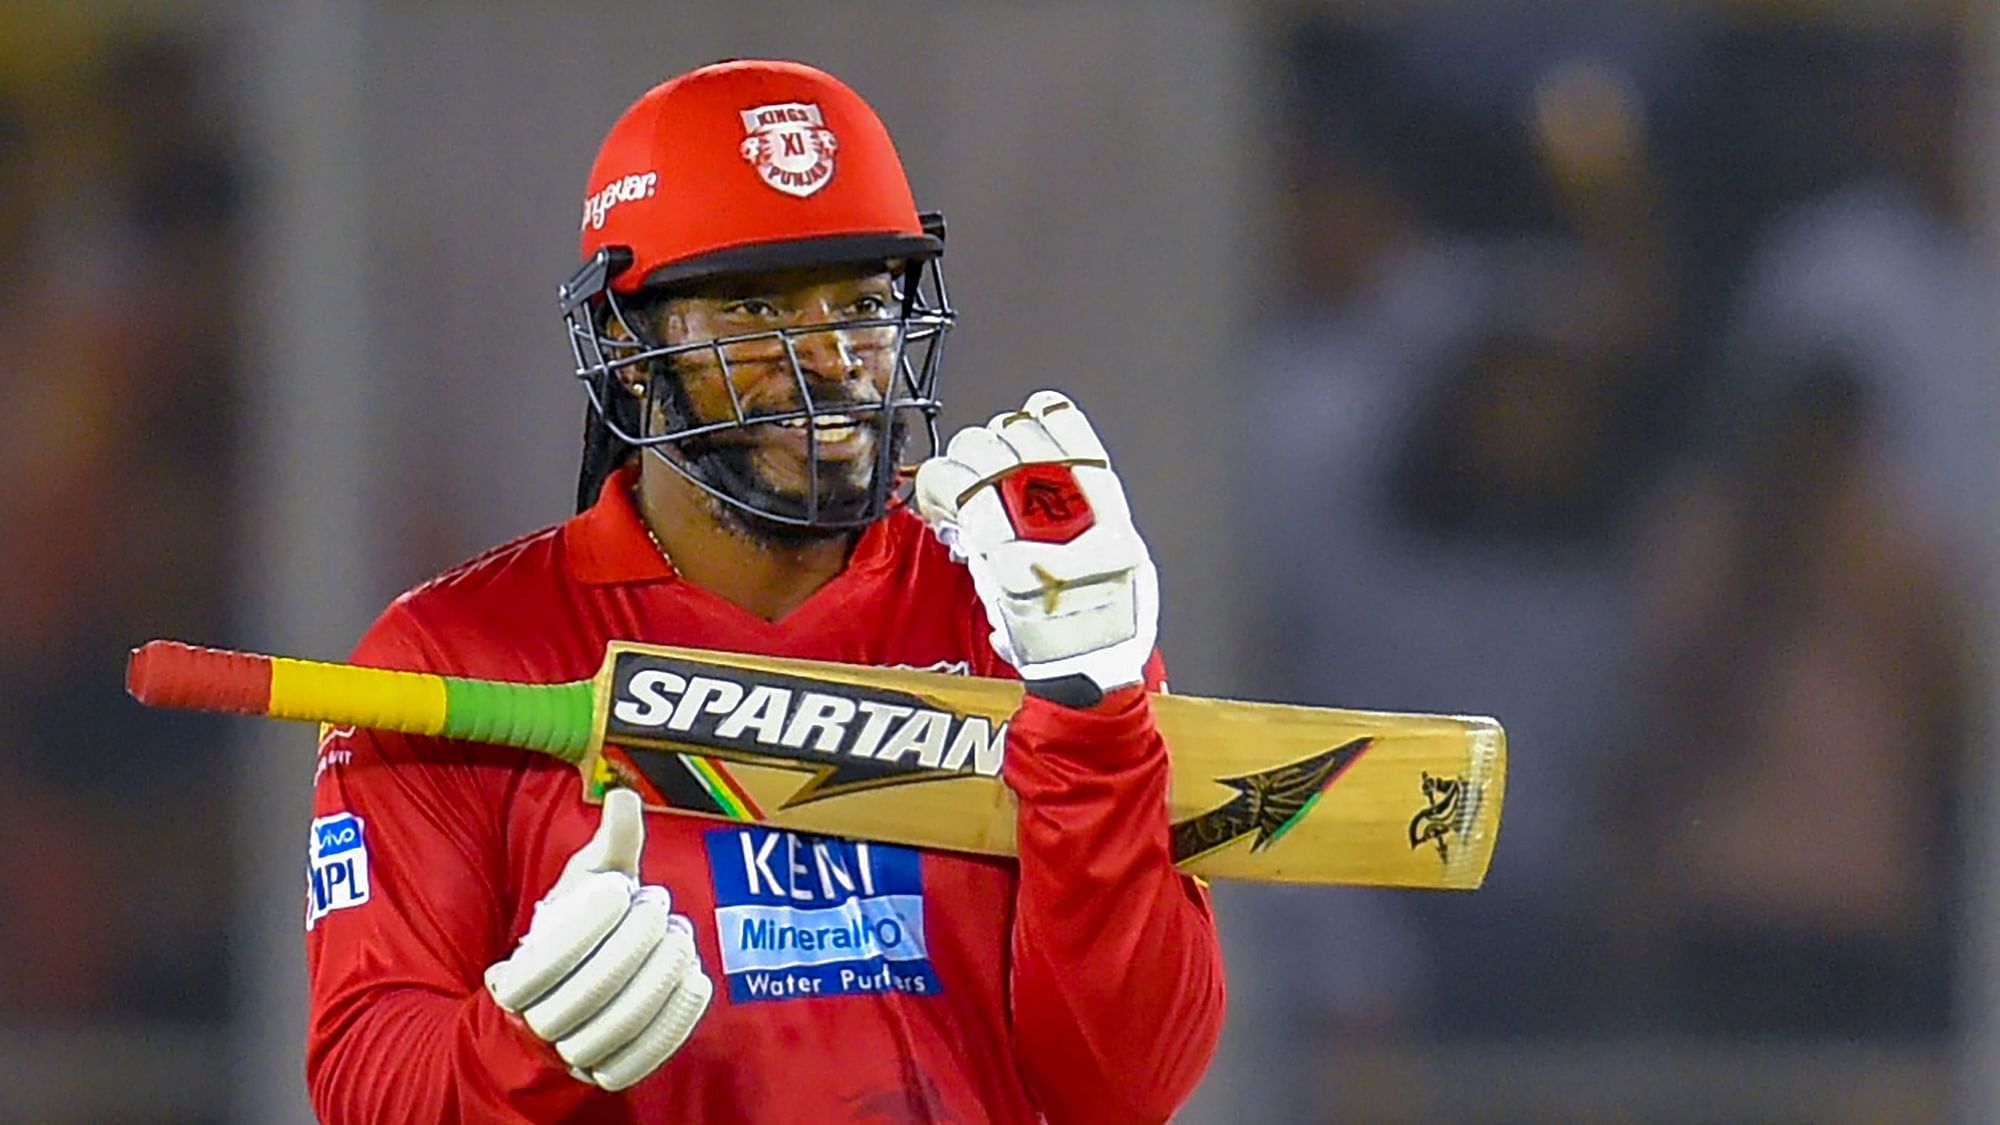 Chris Gayle has been retained by Kings XI Punjab while some other big names have been released.